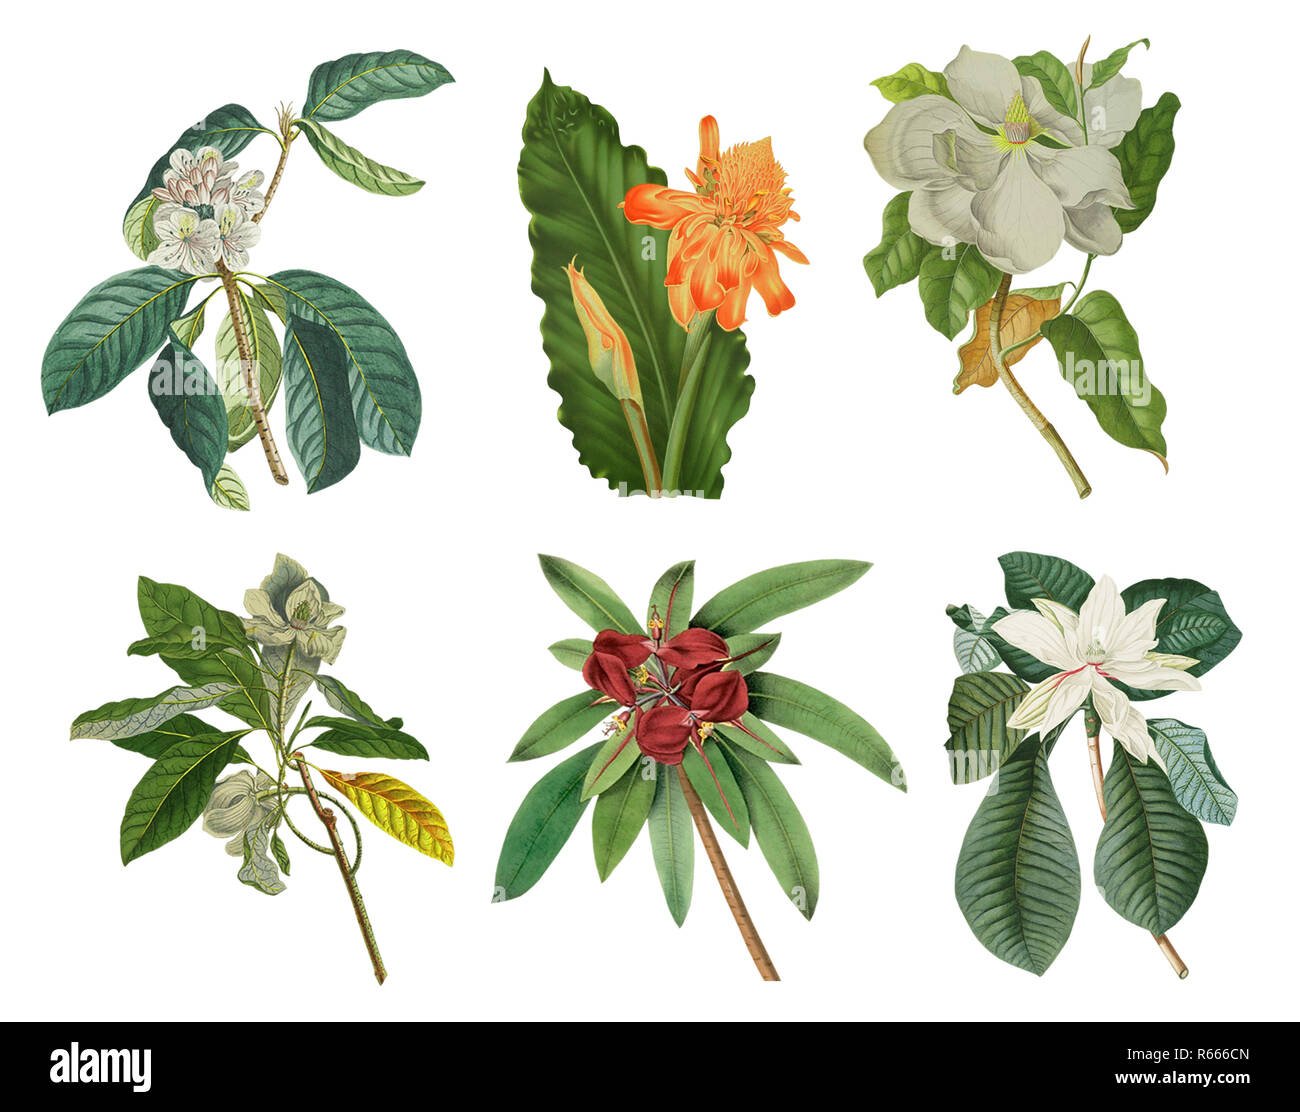 3 in 1, Best HD PNG VINTAGE FLOWER image in one pack Stock Photo